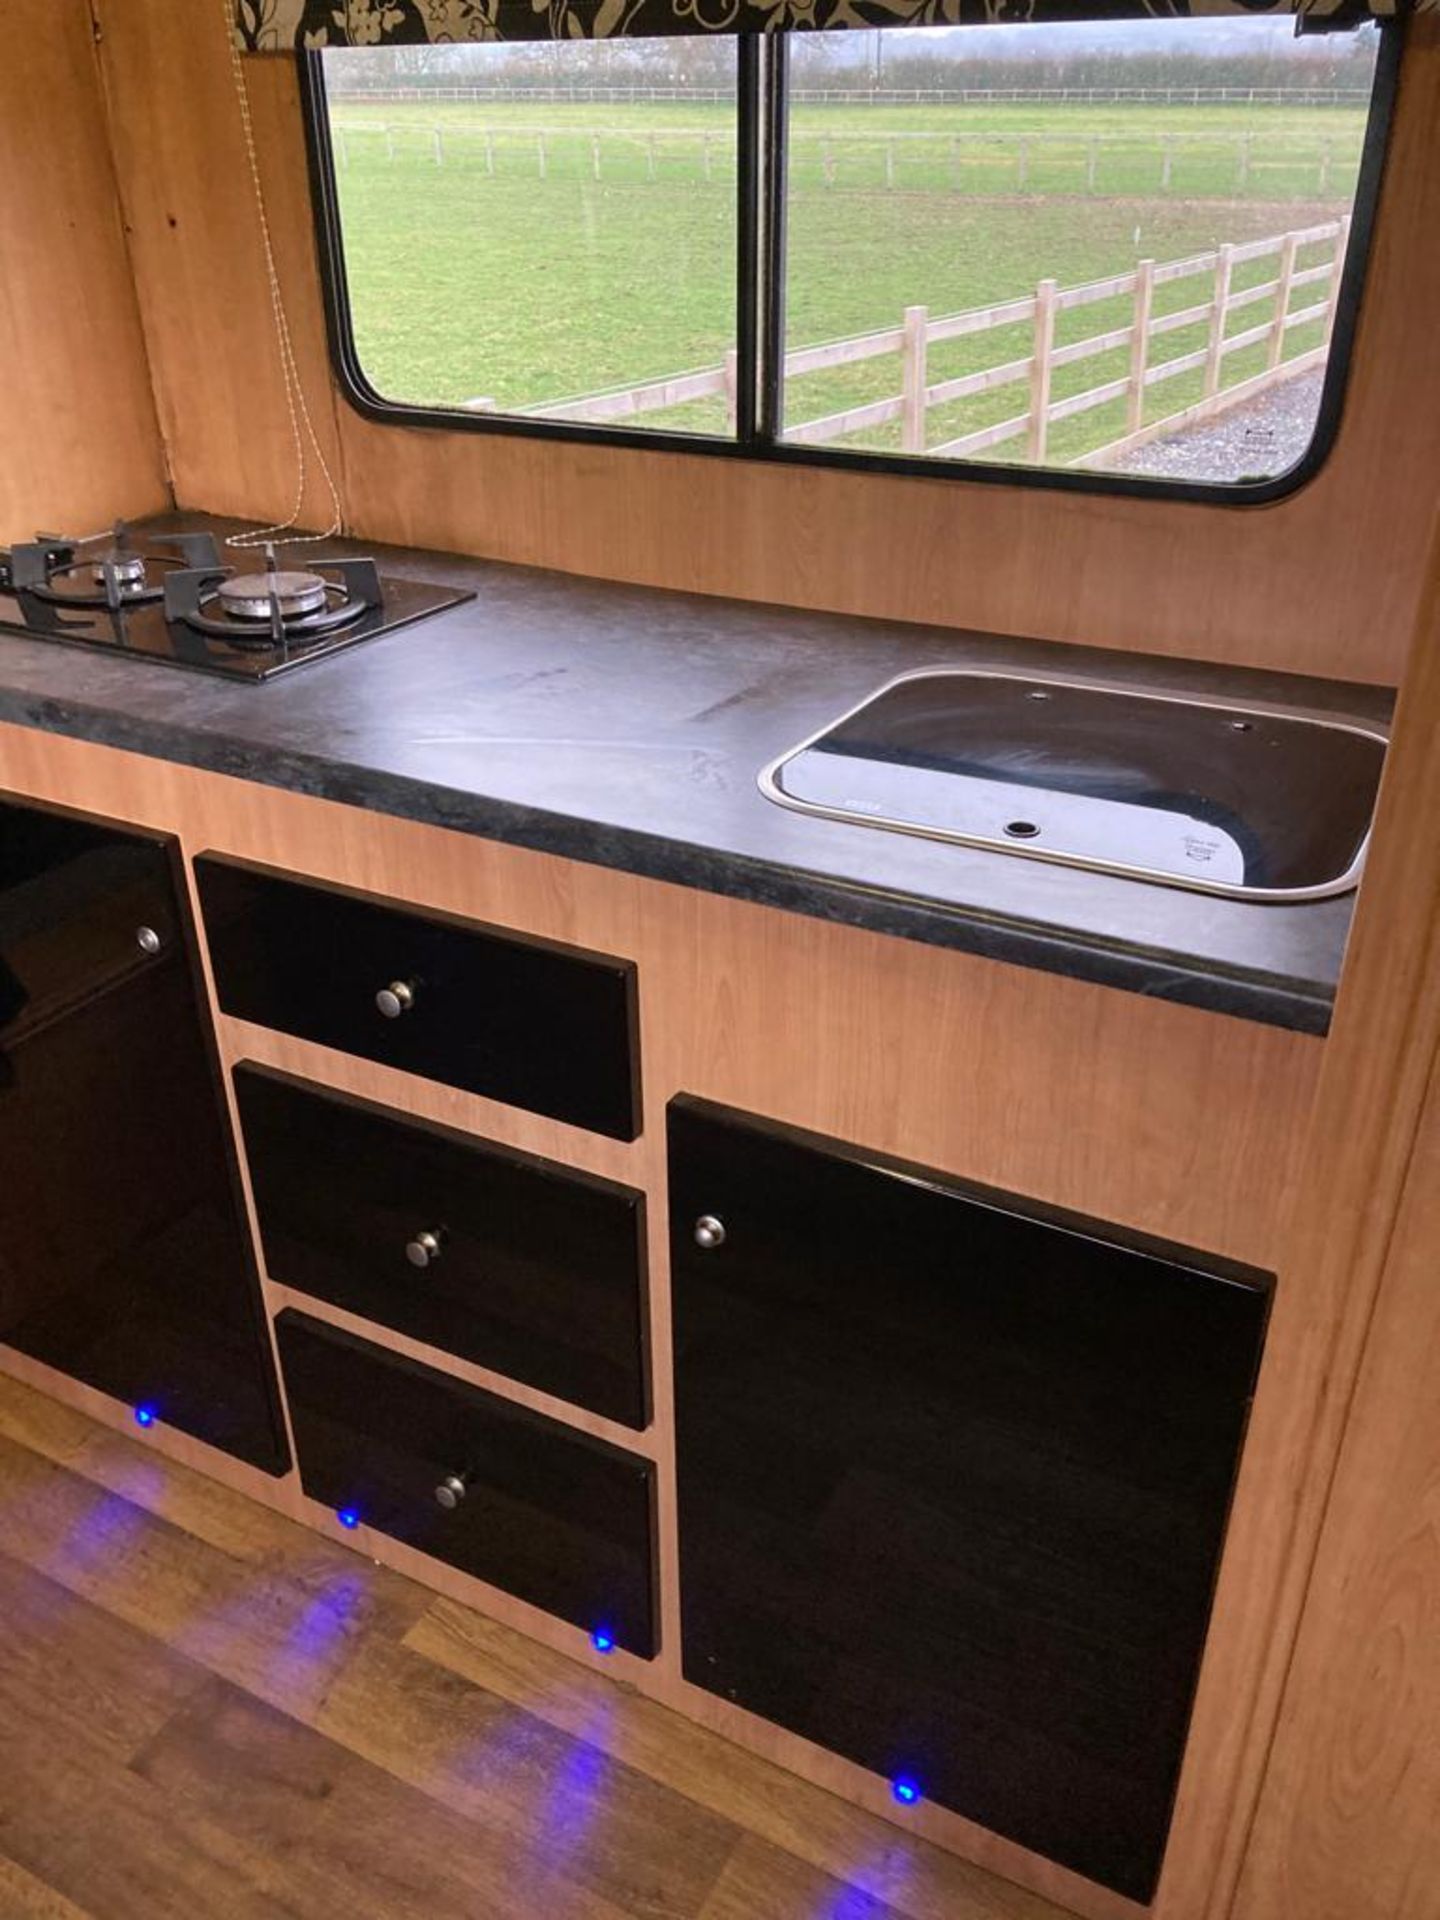 HORSE BOX / ACCOMODATION, SPACE FOR 3 PONIES OR 2 HORSES (MAX HEIGHT 17 HANDS) 304,473 KILOMETERS - Image 23 of 33